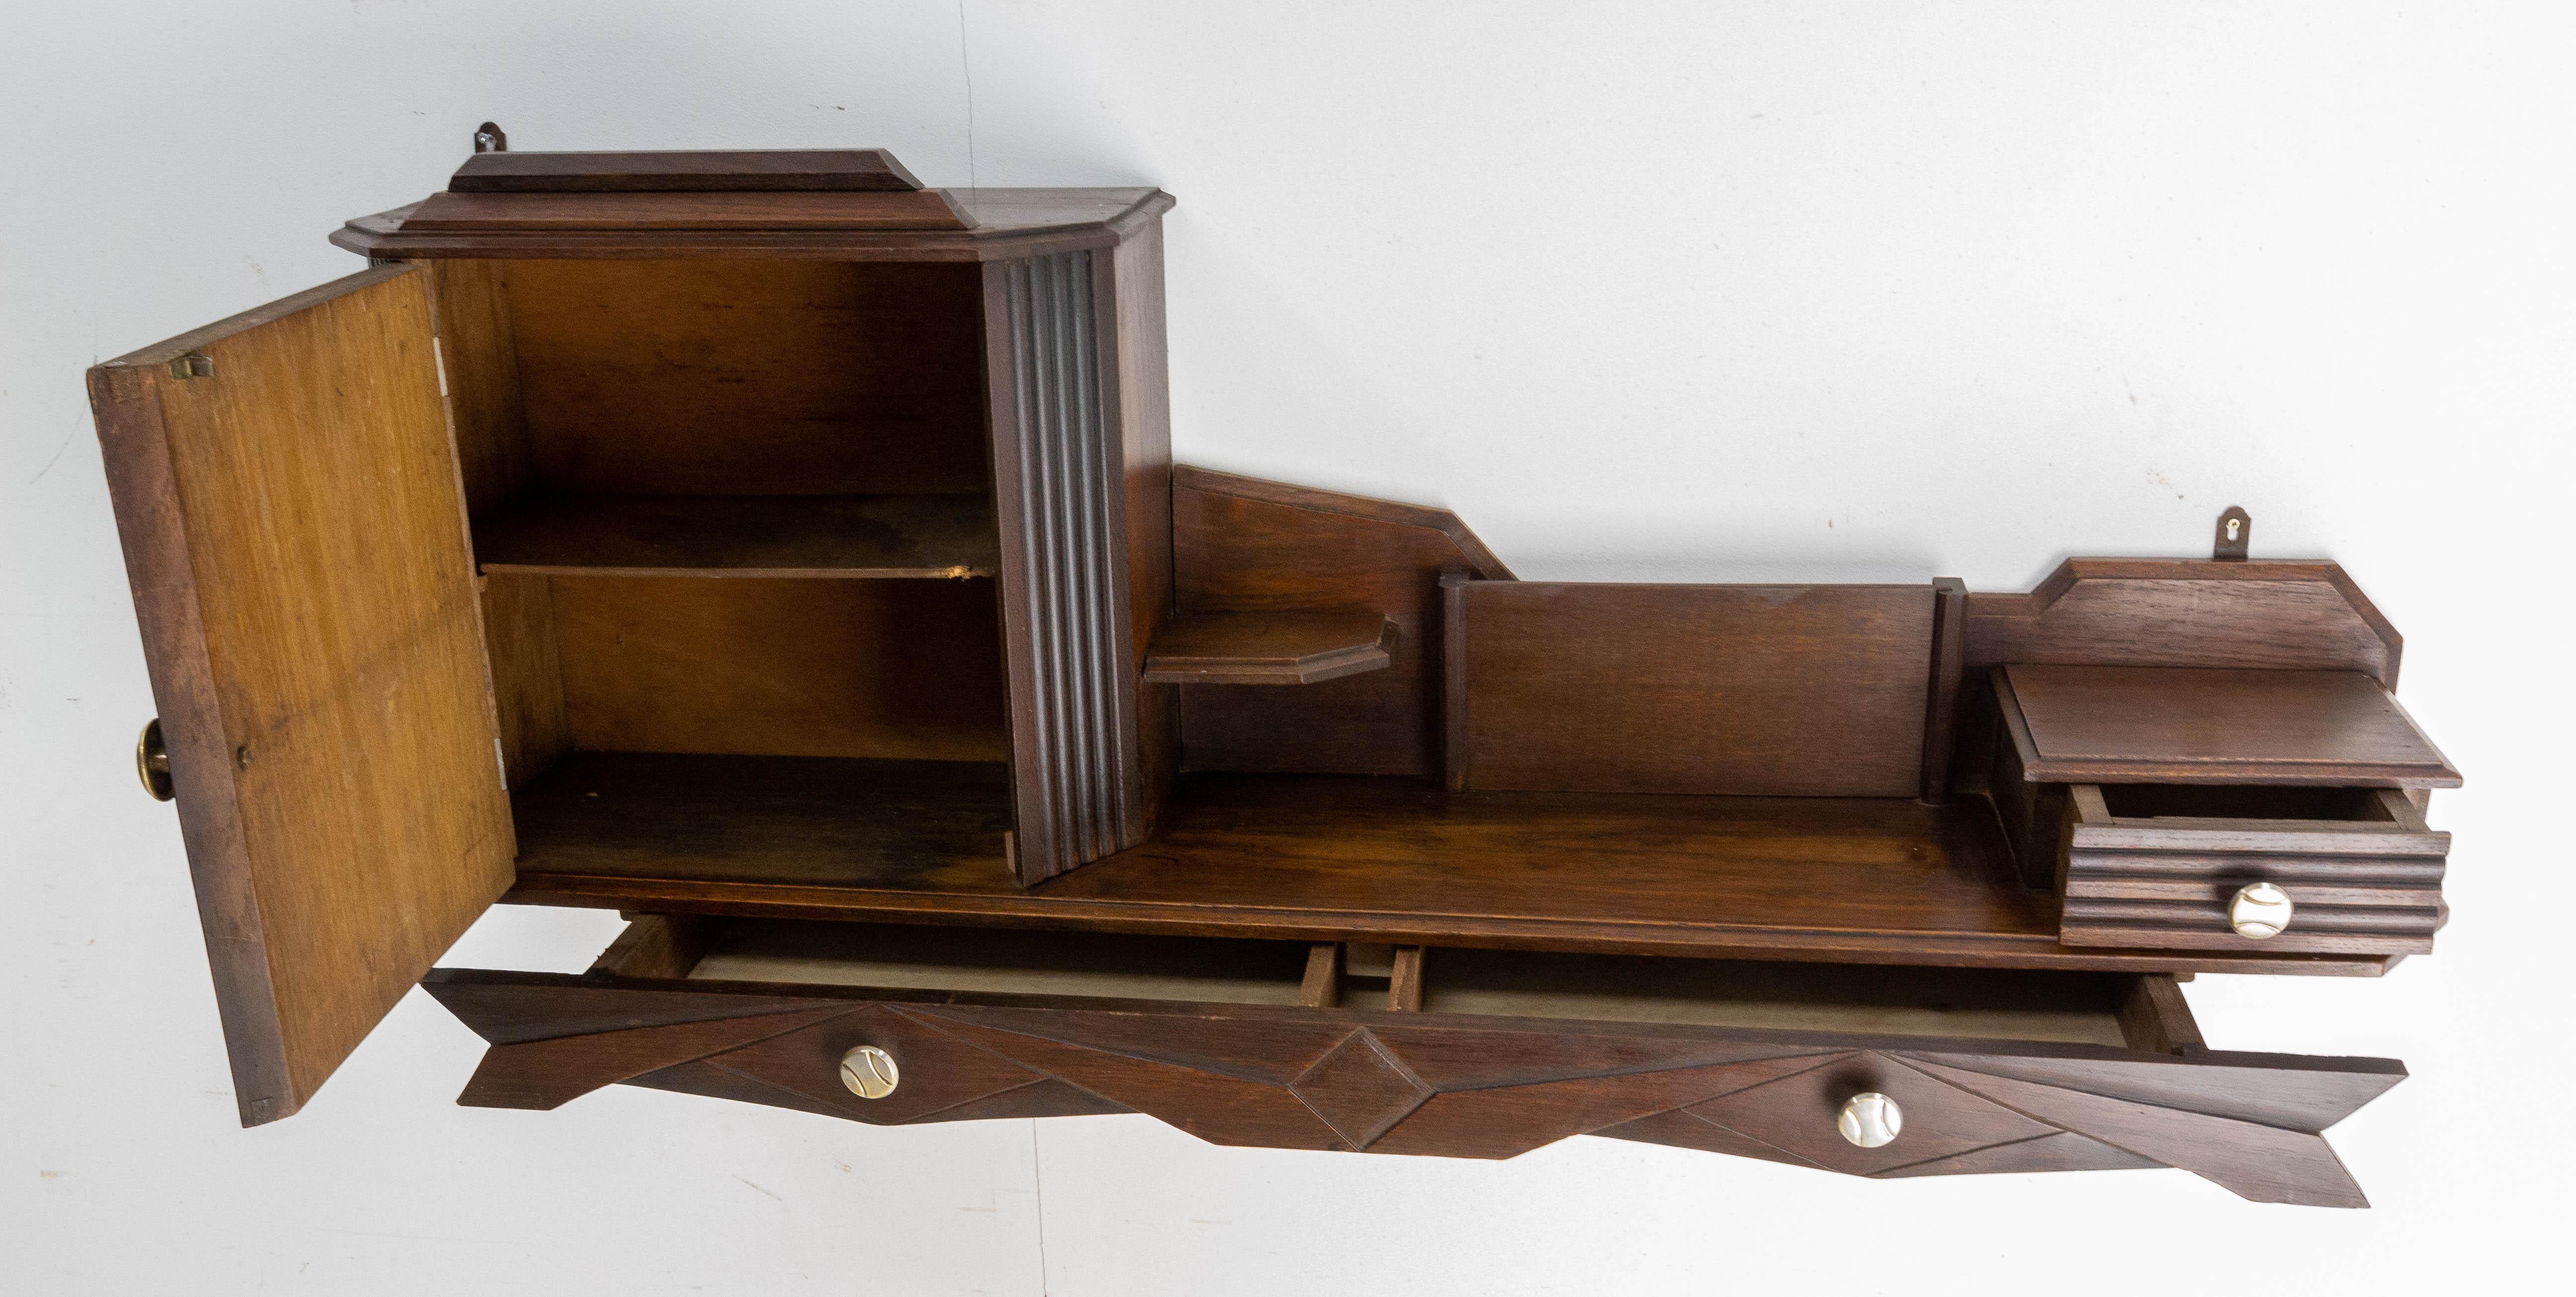 Art Deco Entry Shelf with Cabinet and Drawers Swiss Alp Style, French, 1930 For Sale 1